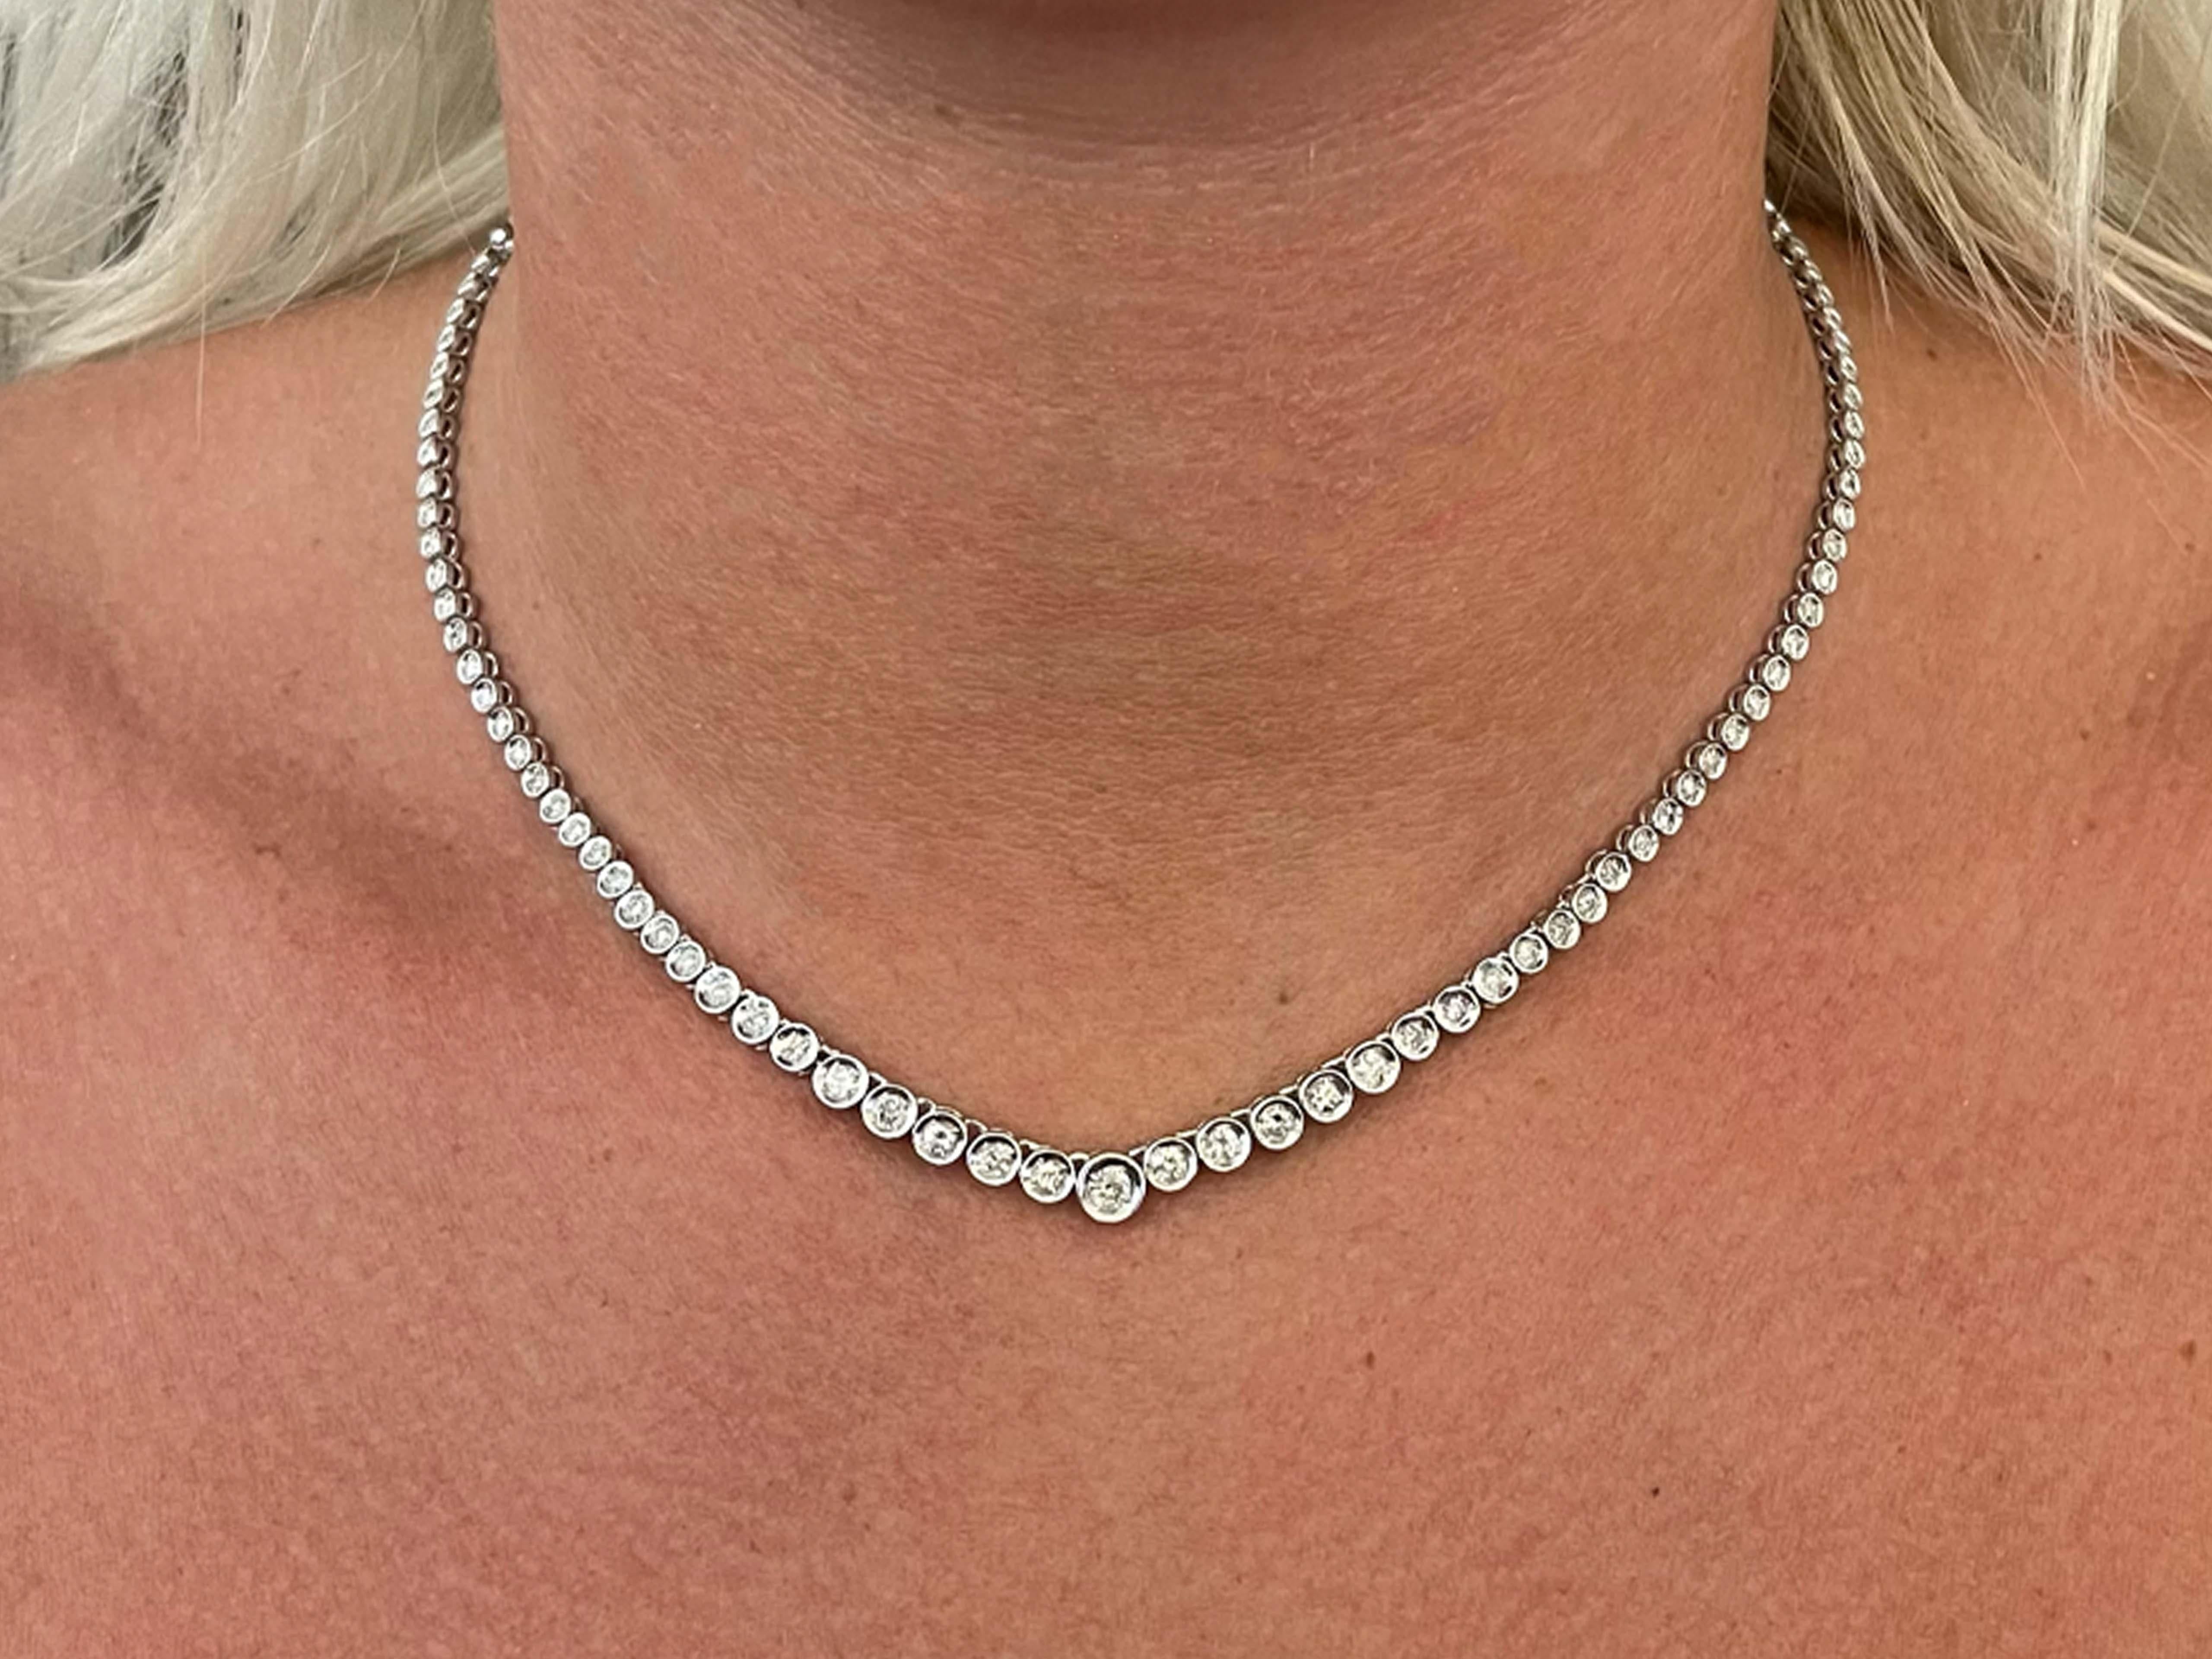 Item Specifications:

Metal: Platinum 900

Total Weight: 27.2  Grams

Chain Length: 16 inch

Diamonds: 114 Round Brilliant Diamonds

Total Diamond Weight: 3.00 Carats

Diamond Color: G-H

Diamond Clarity: SI2-I1
​
​Stamped: 